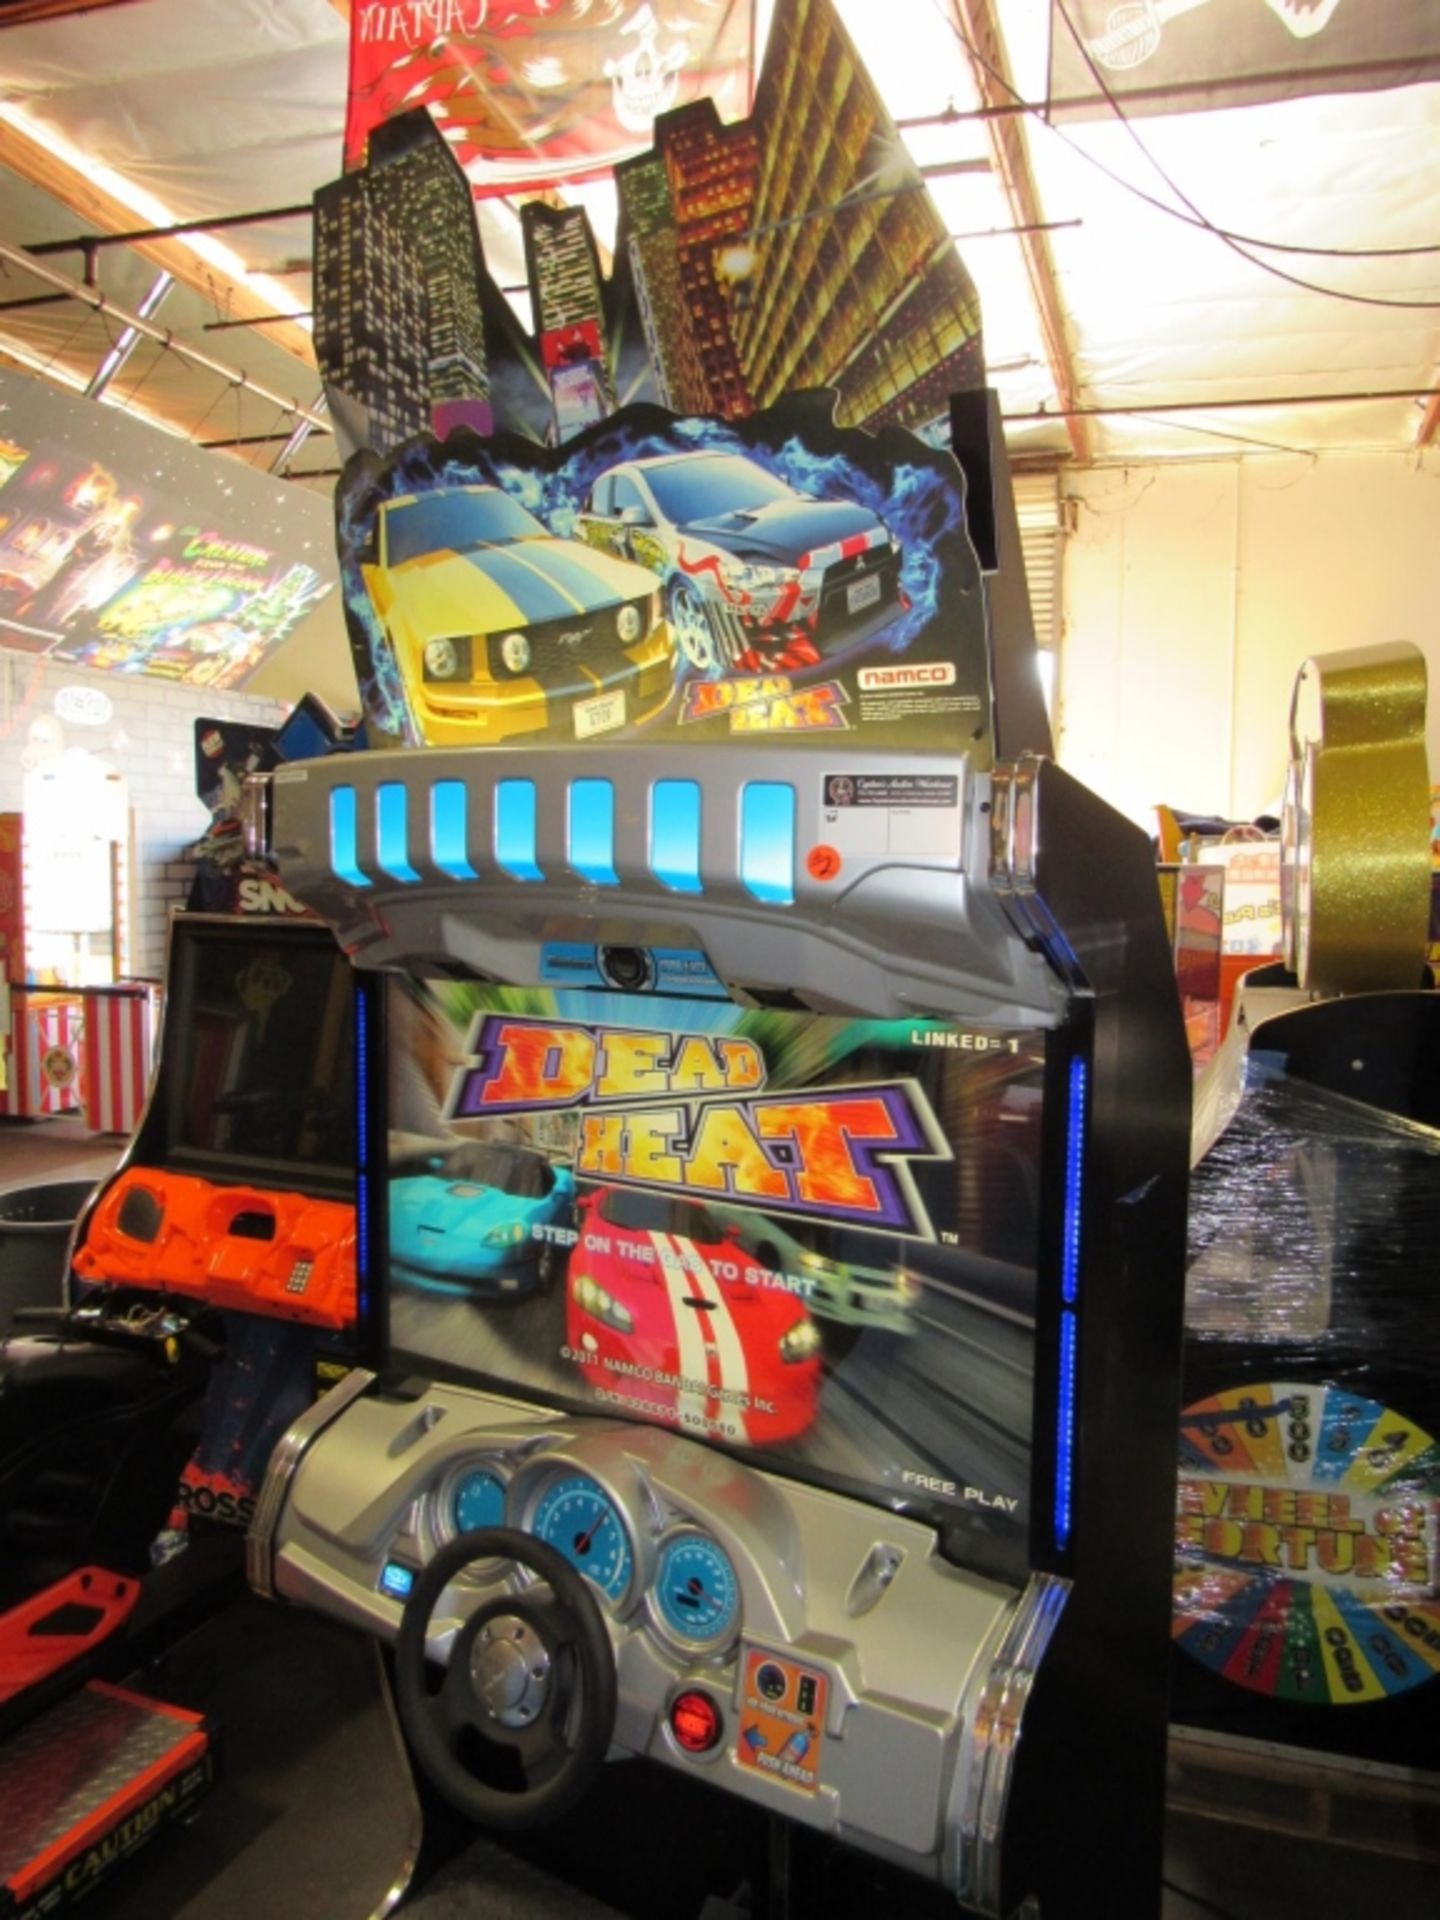 DEAD HEAT 42" DX DRIVER ARCADE GAME NAMCO - Image 4 of 6